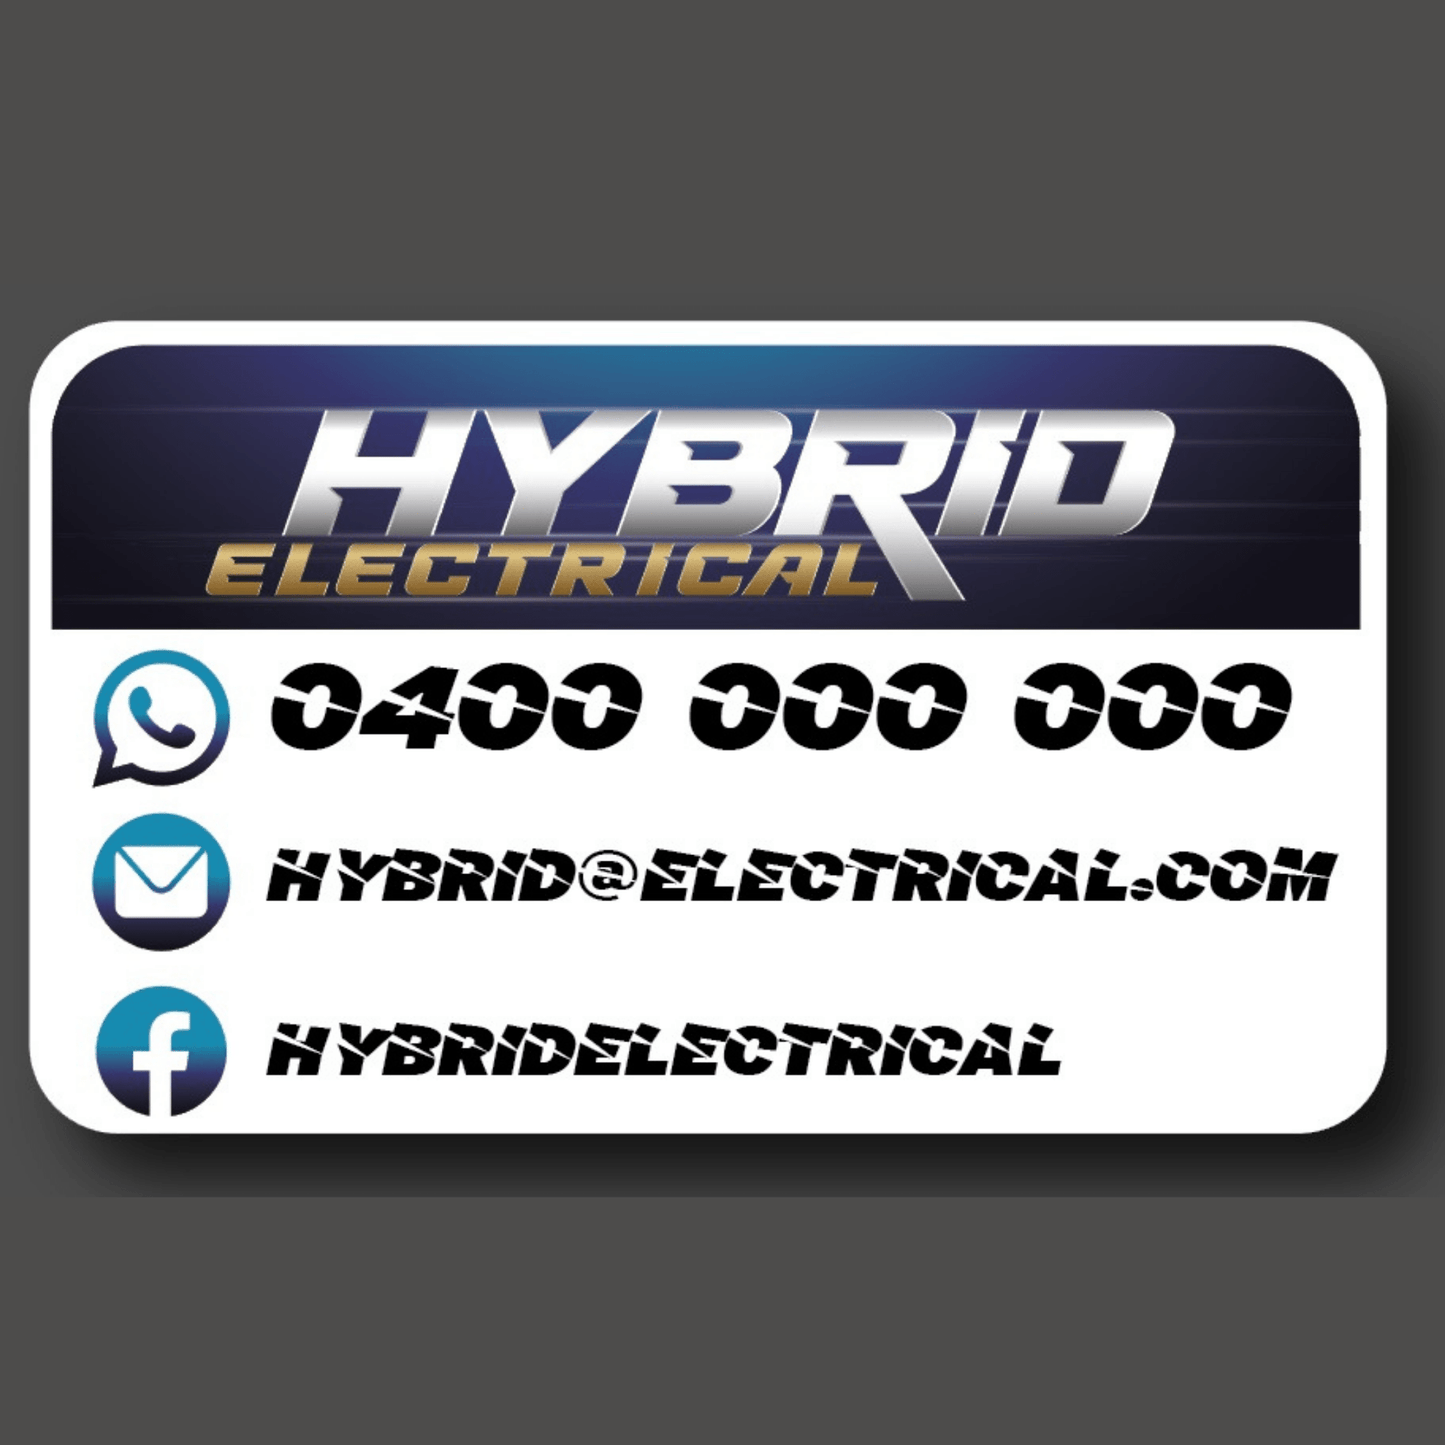 Electrician Customised Vinyl Stickers Each 75 x 45mm Total 256 Stickers